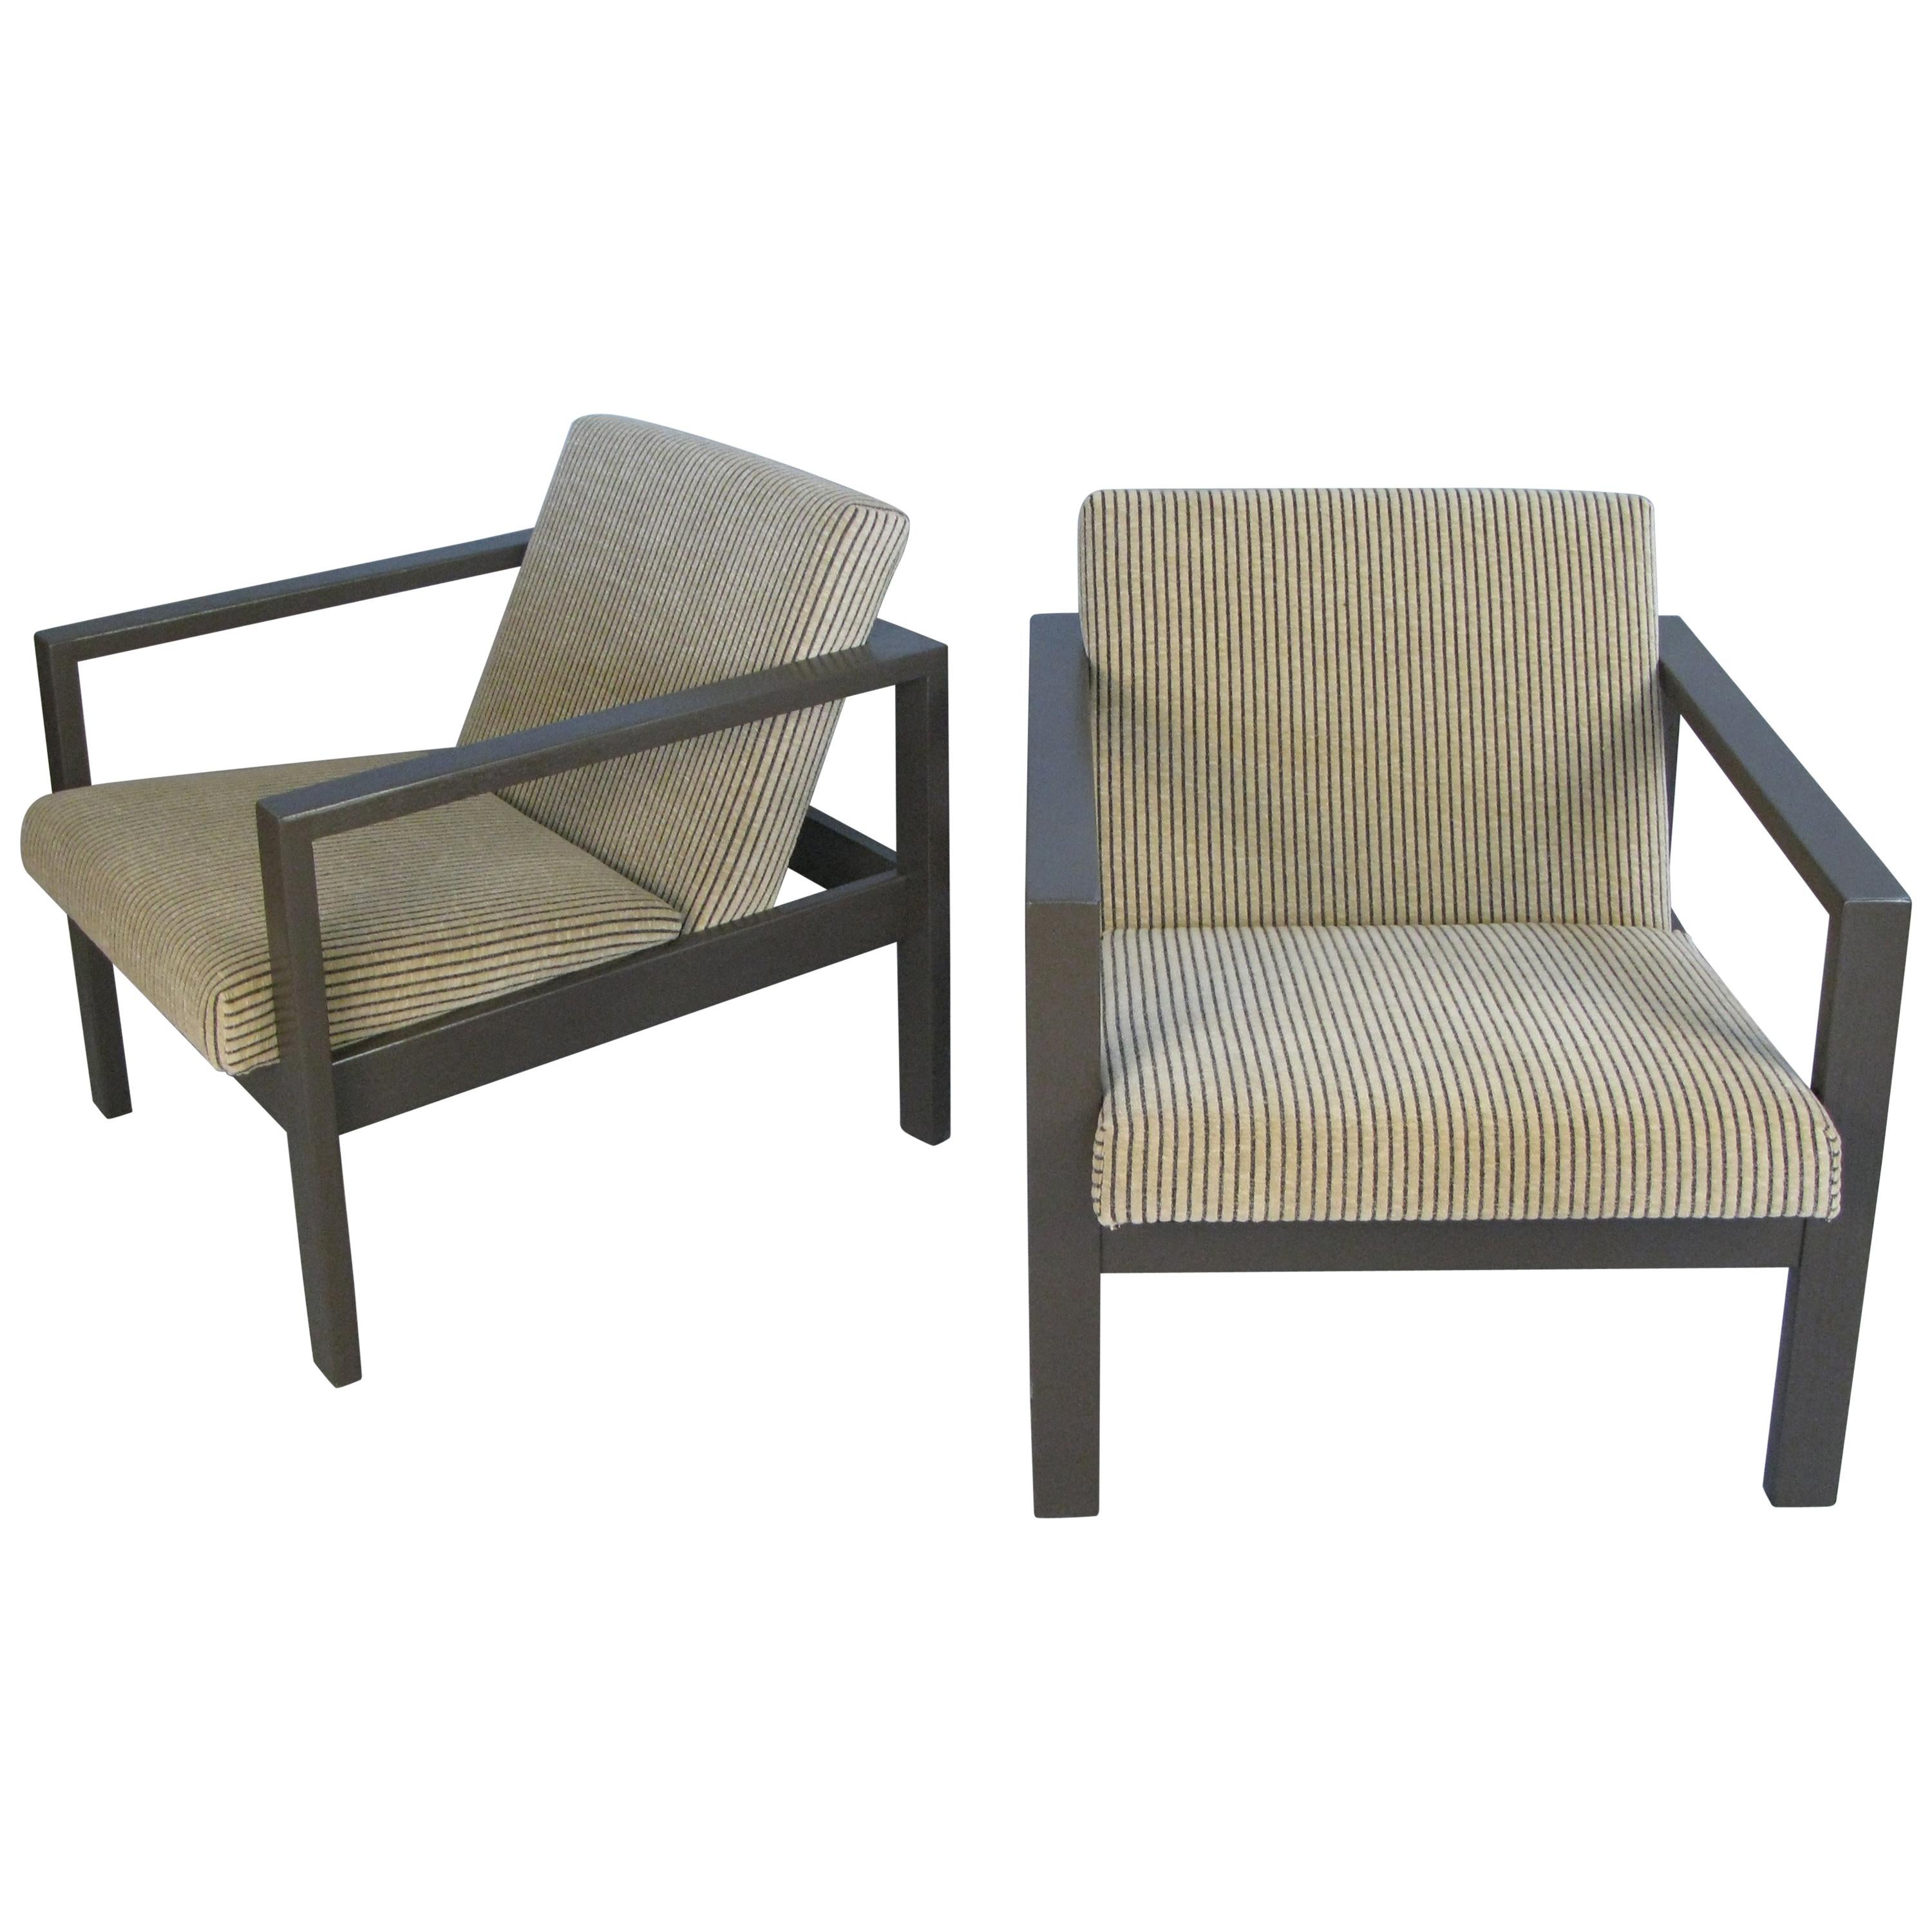 Pair of 1950s Lounge Chairs by Harvey Probber